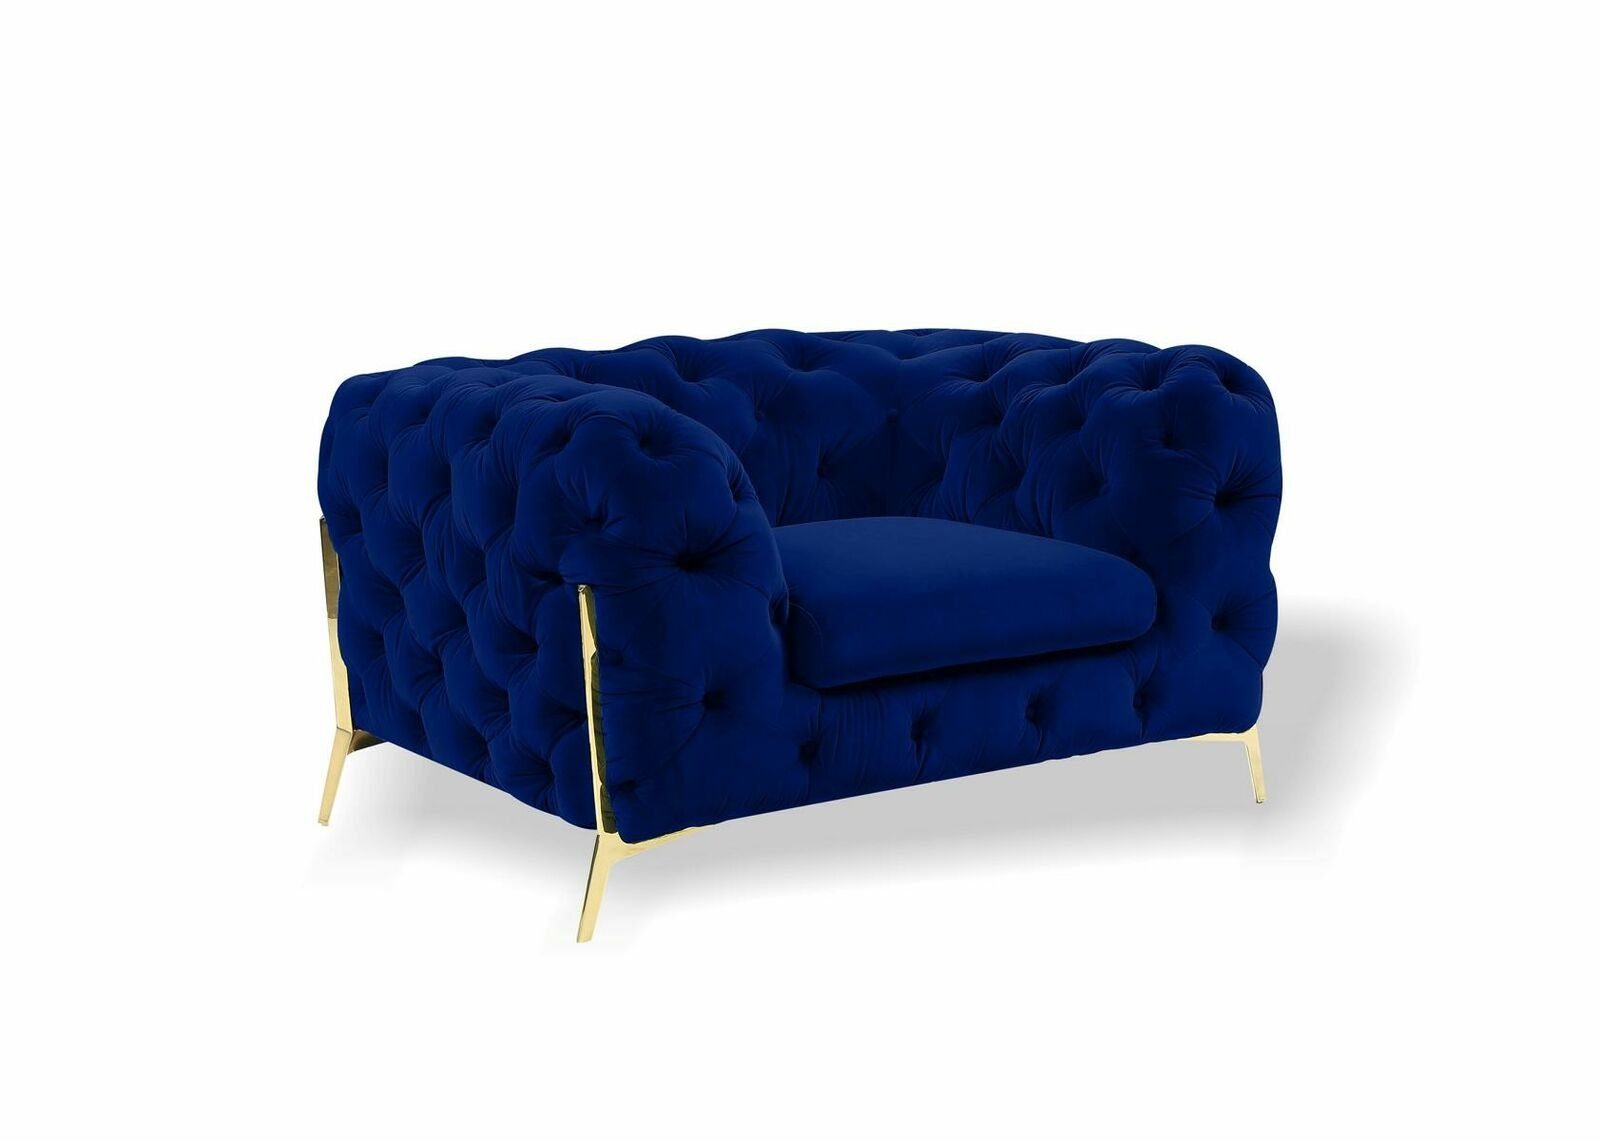 Chesterfield Ohrensessel Couch JVmoebel Sofa in 1 Sitzer Couch (Sessel), Sessel Polster Europe Made Blau Ohrensessel